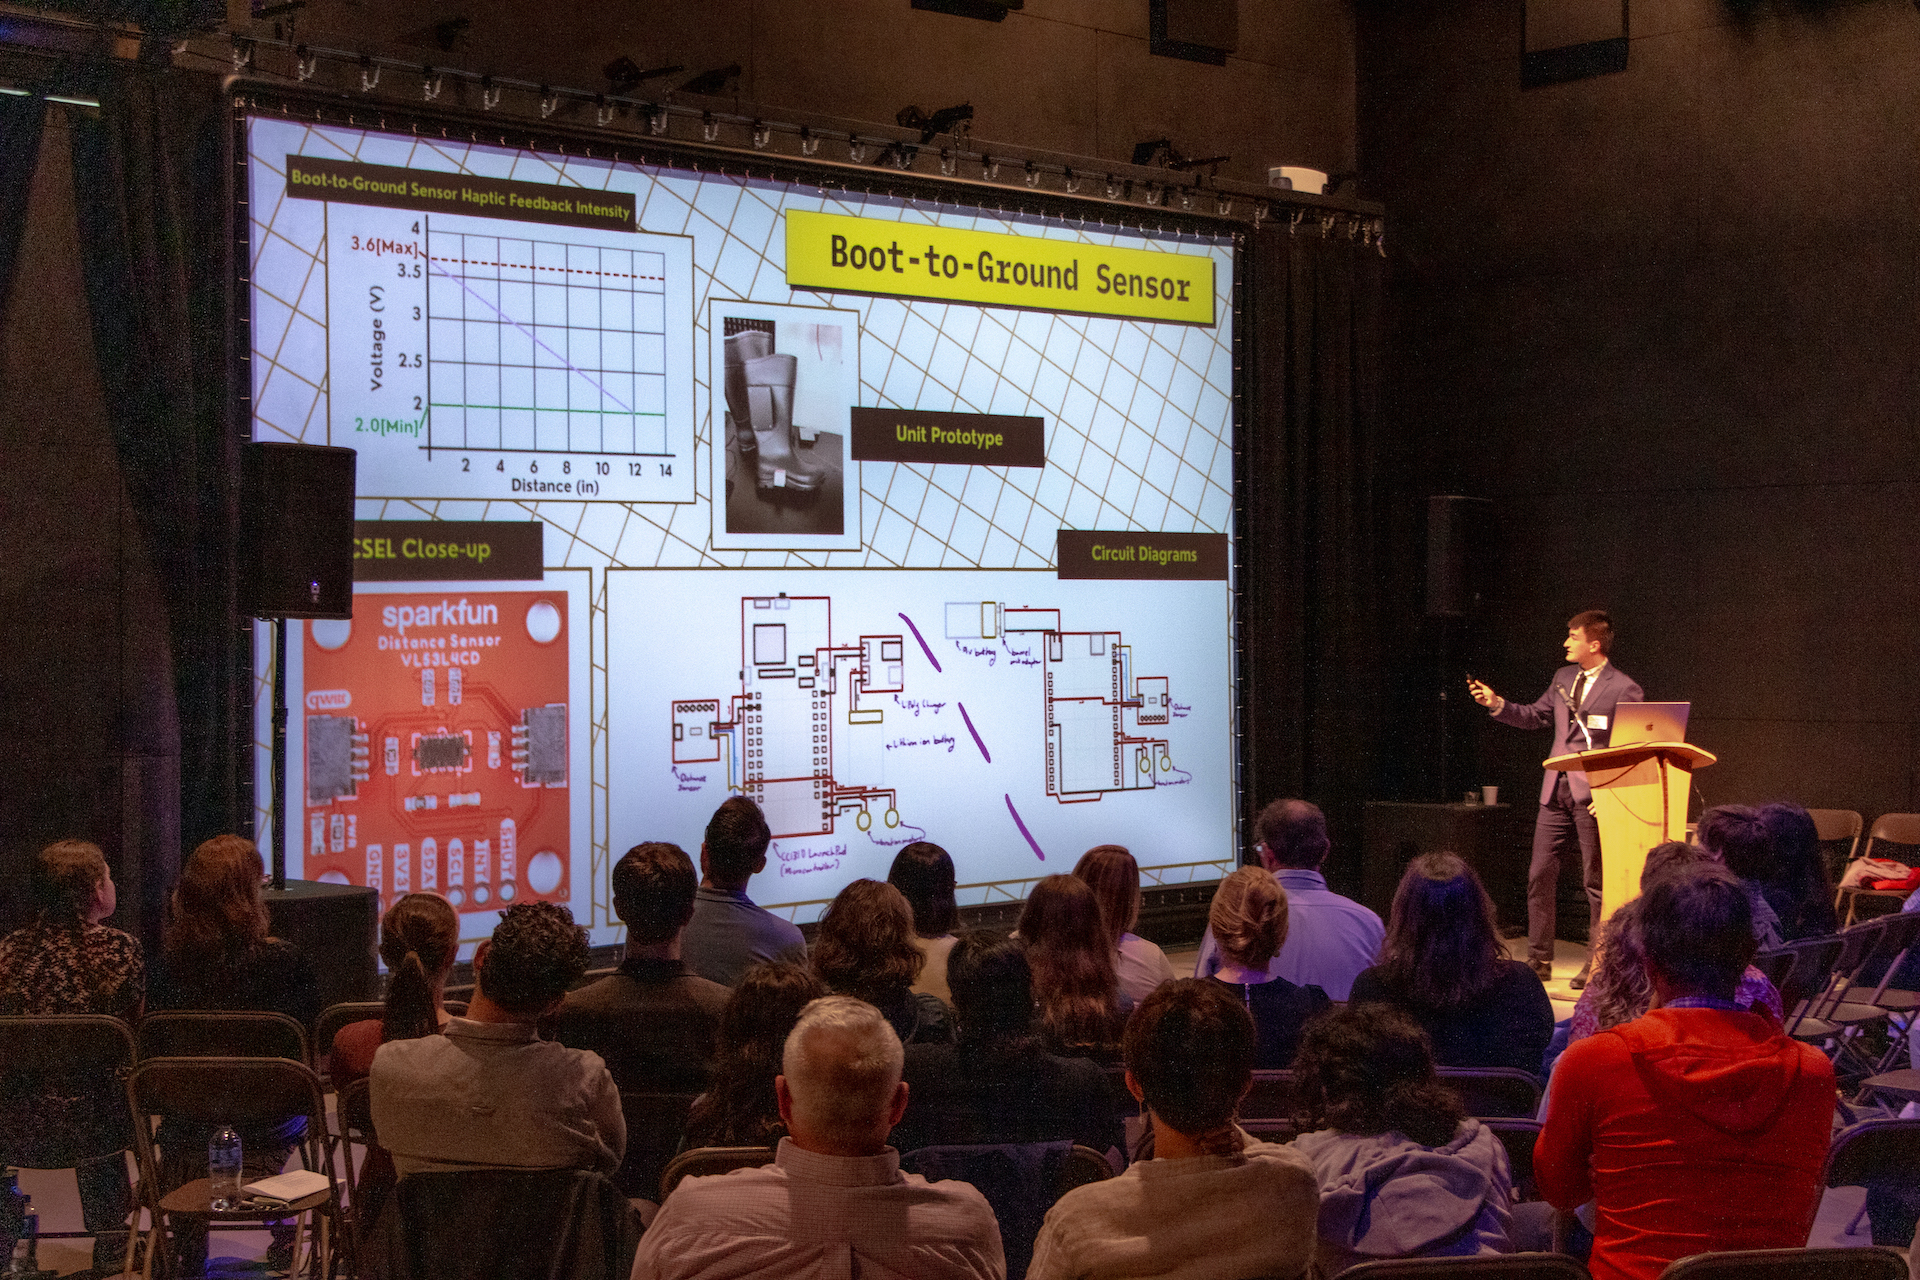 Colby Ting stands at a podium on the right side of the image. The audience is seated facing him, along the bottom of the frame. A large projection screen displays Colby's presentation slide, which reads "Boot-to-Ground Sensor" in a yellow box in the upper left. The slide also includes a chart, a photograph of a boot prototype, and diagrams of a censor and its connections.